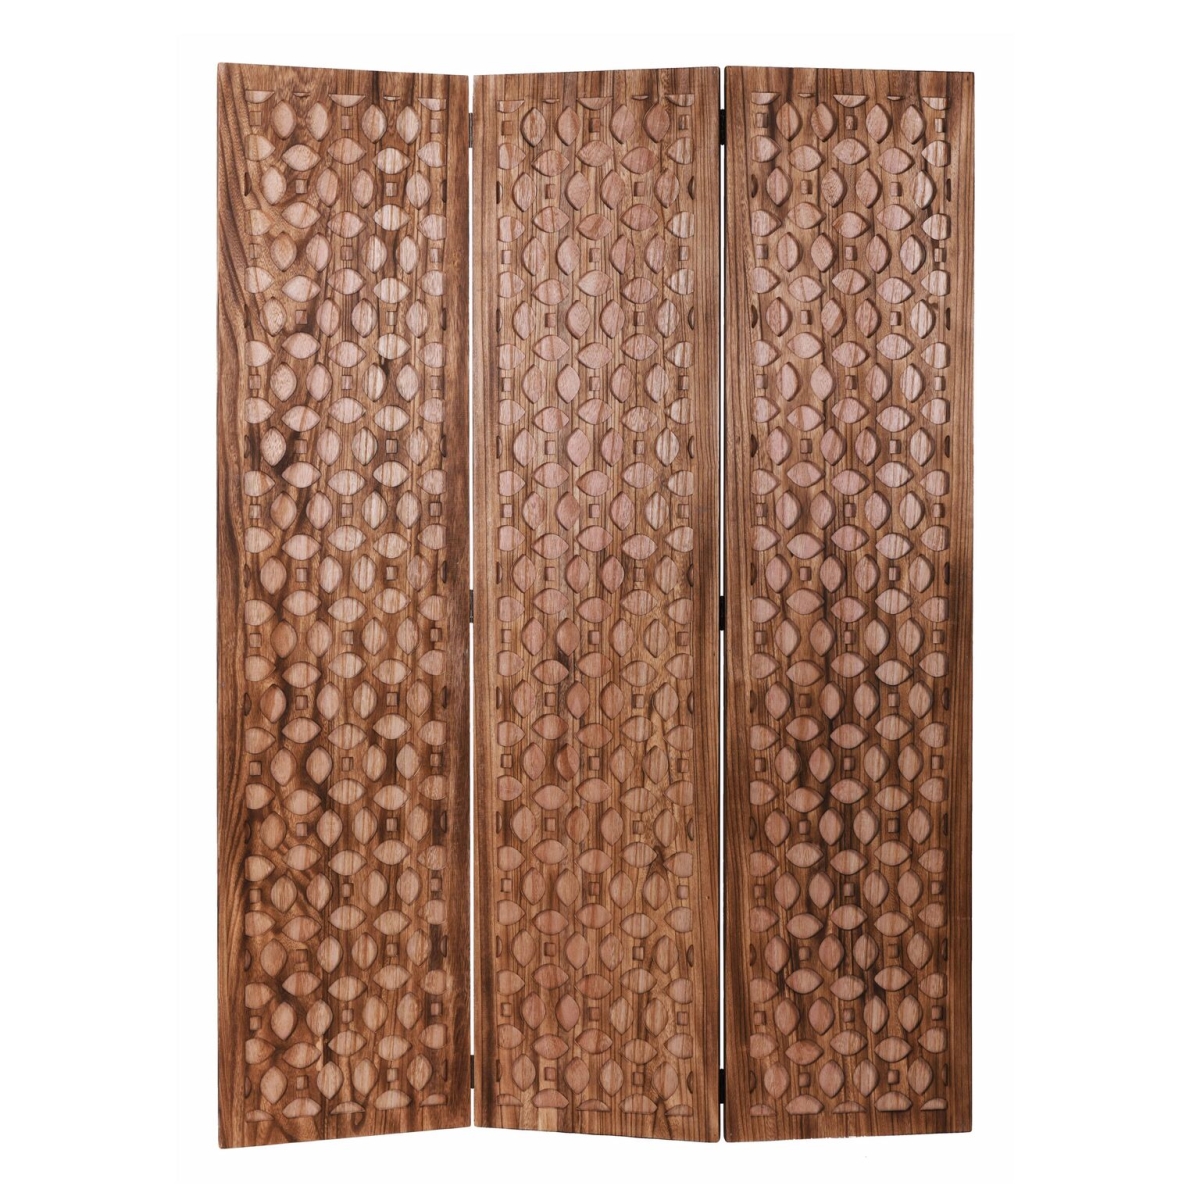 342753 47 X 1 X 67 In. Colorful Carved Brown Wood Screen